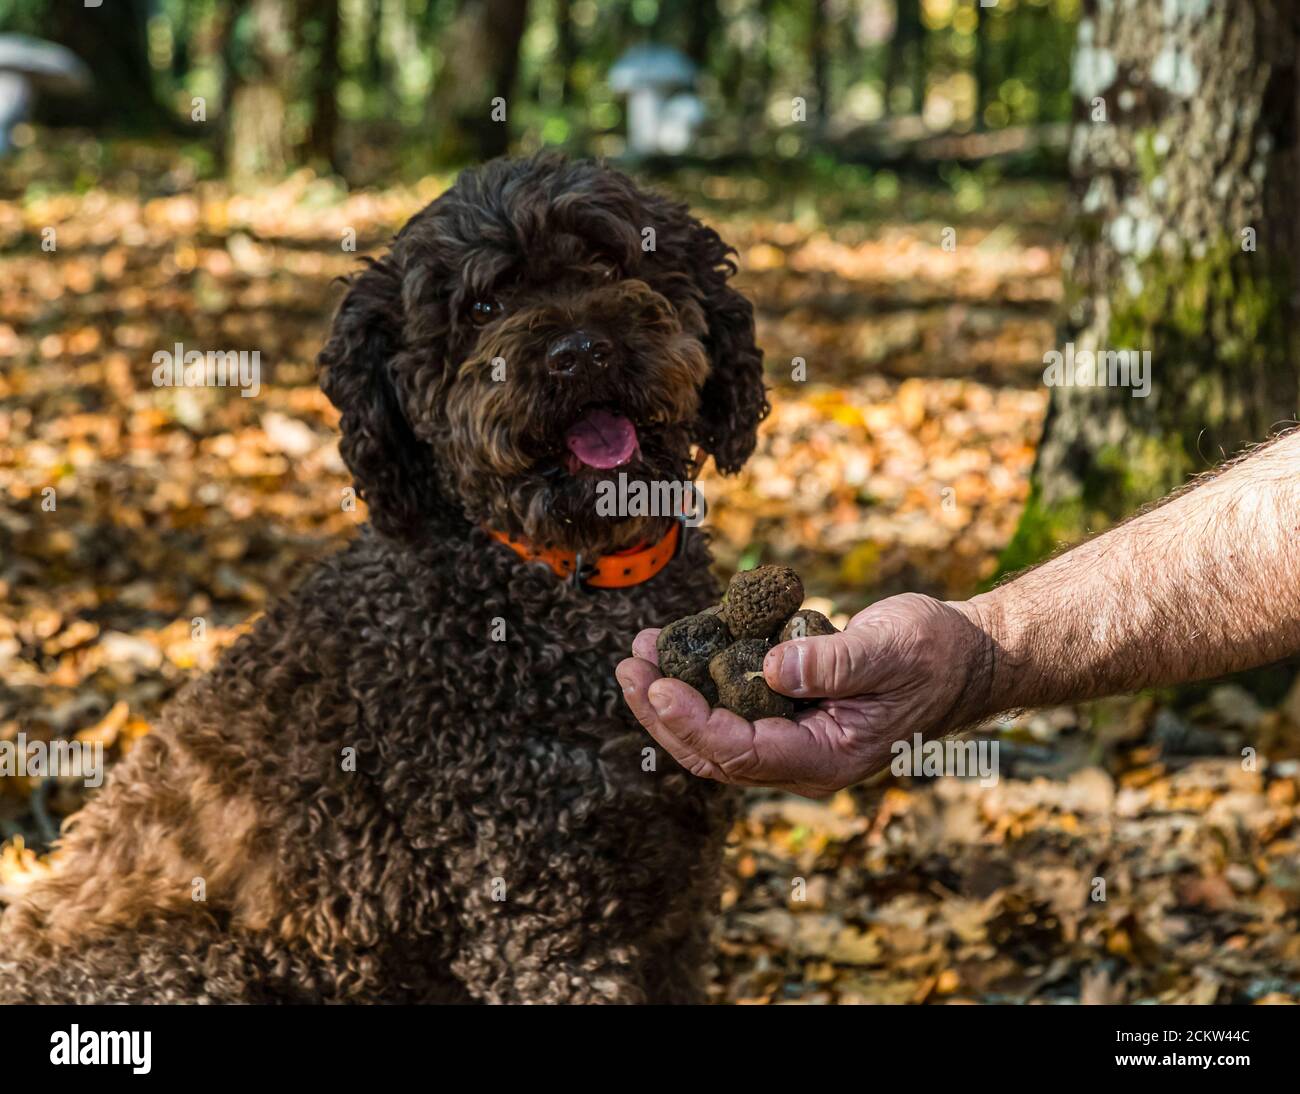 Dog helping to harvest black truffles in Burgundy, France. Truffle lady Elfe is 9 years old. In training, the dogs are trained to smell the ripe truffles. The dogs can indicate truffles at a depth of 10 to 12 centimeters Stock Photo